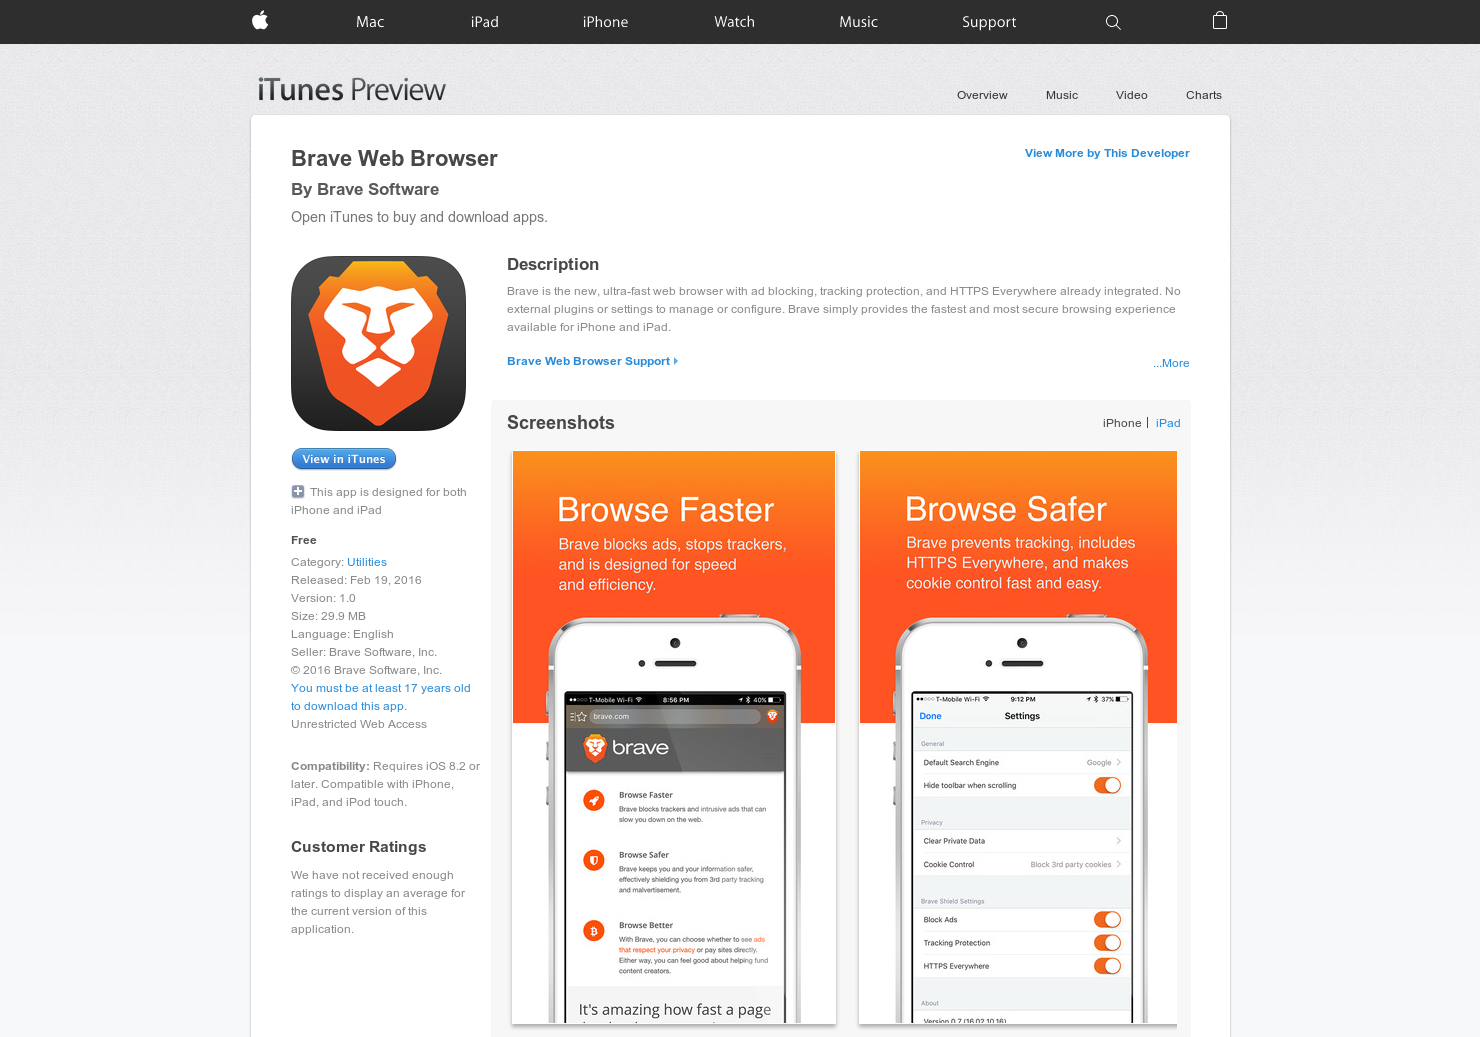 download the last version for ios brave 1.52.126